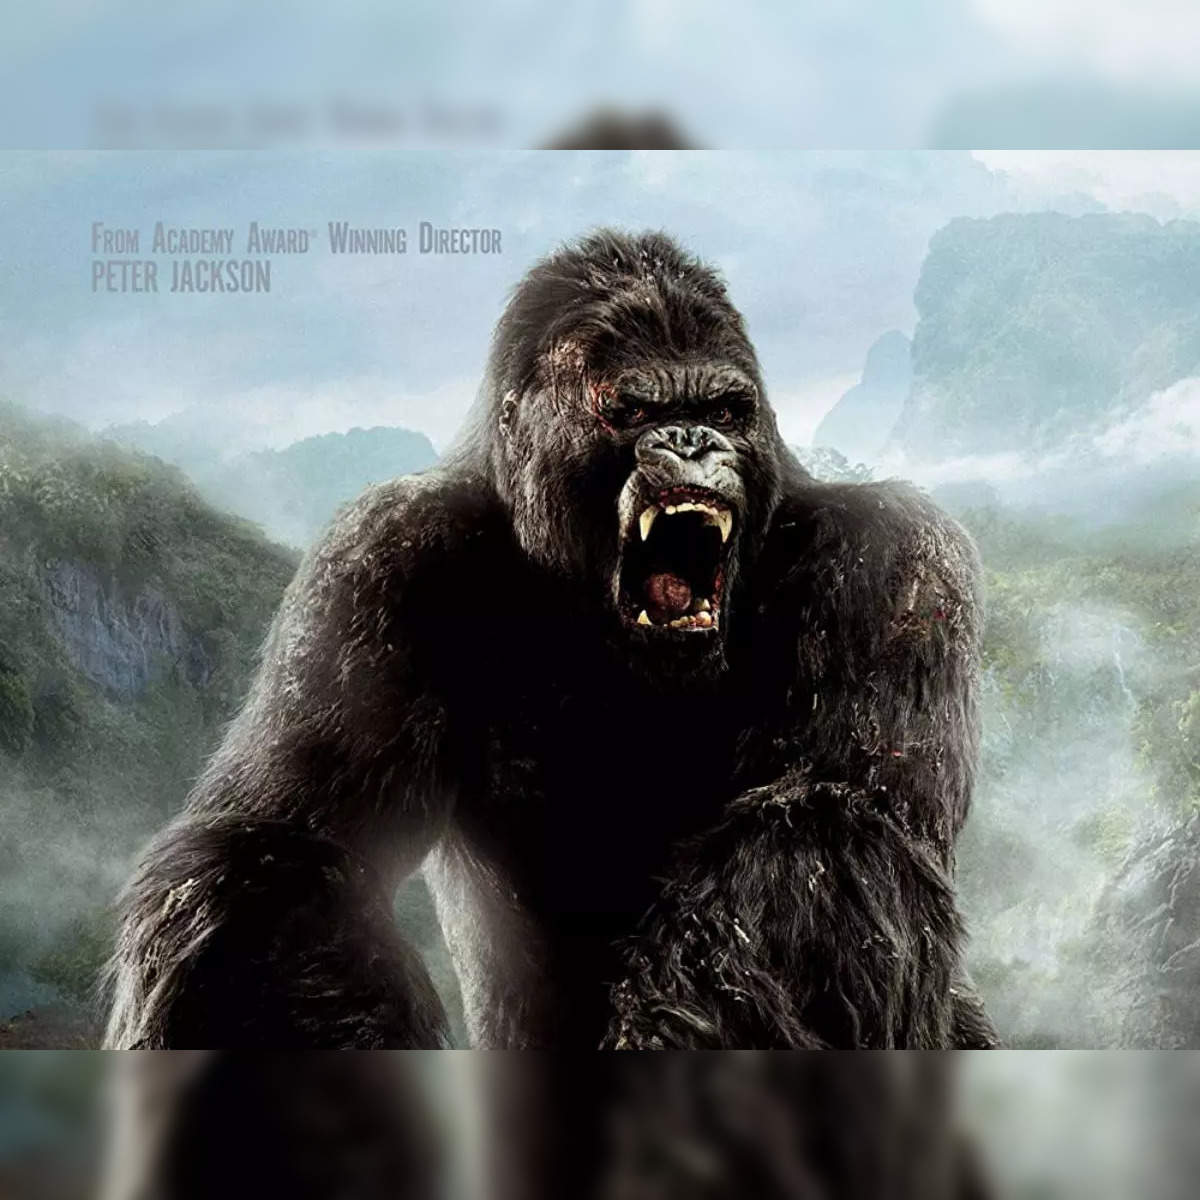 king kong: 'King Kong' live-action series in early stages of development at  Disney+ - The Economic Times